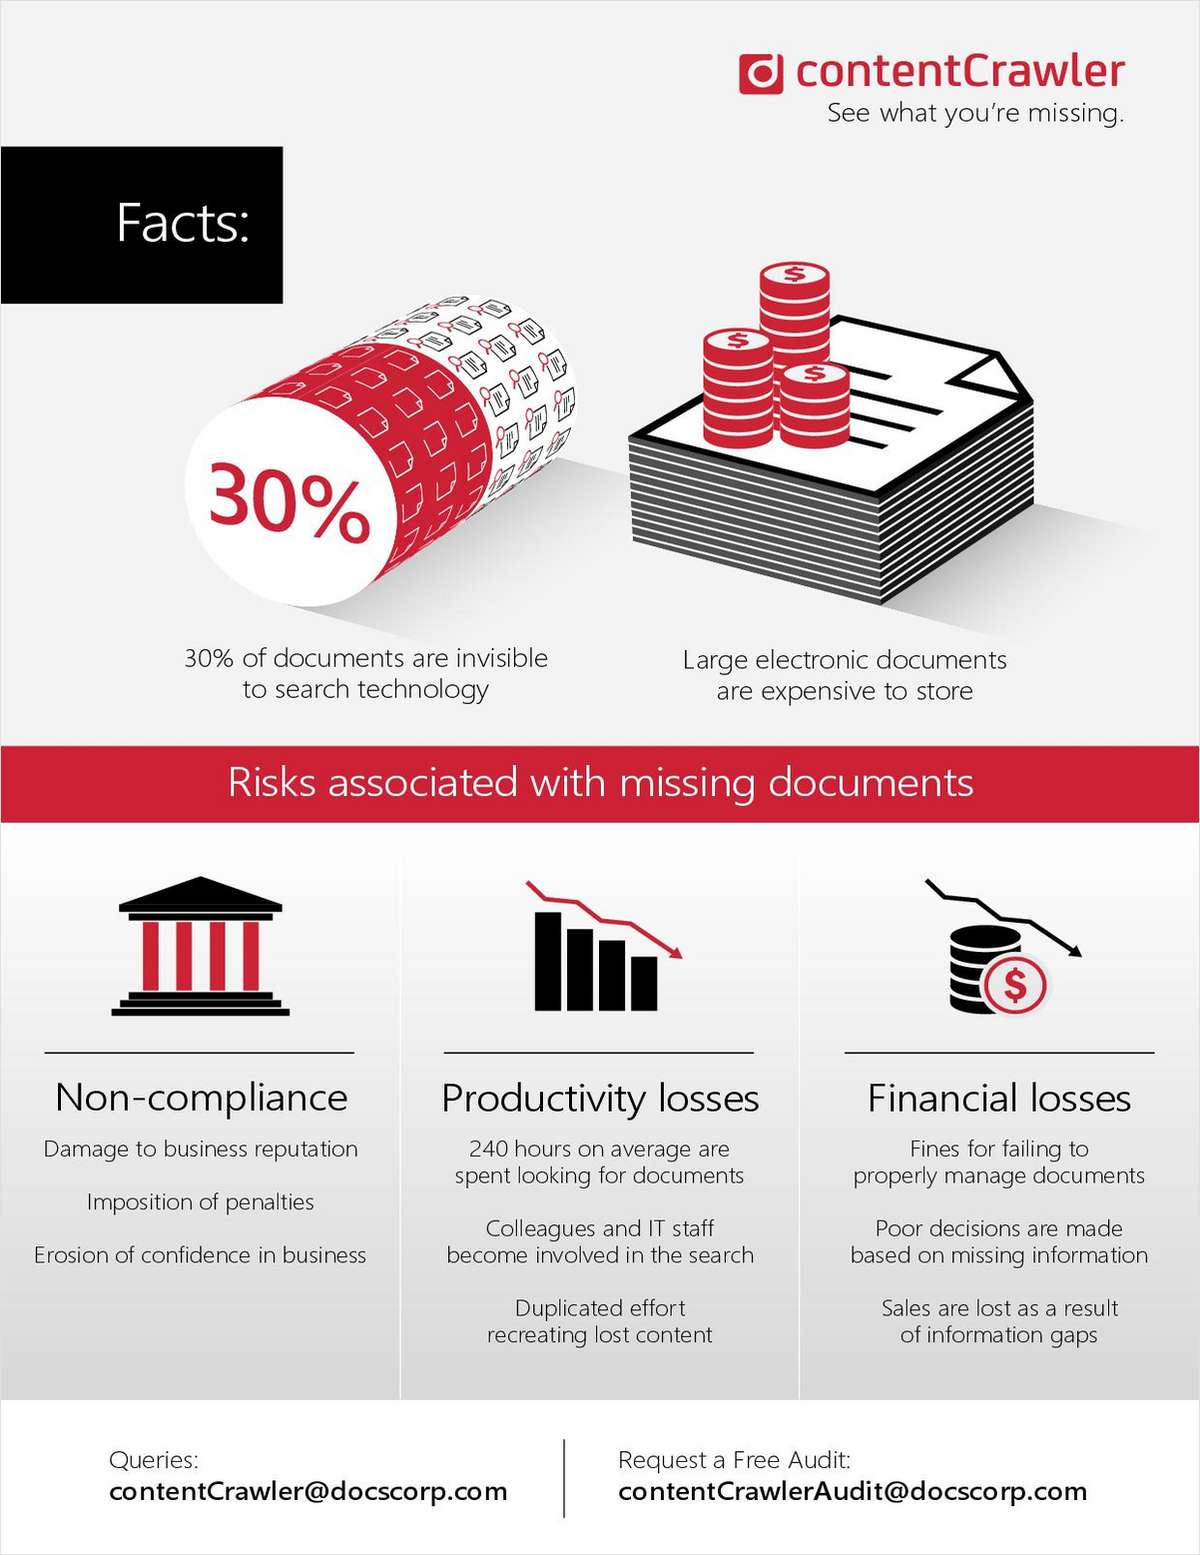 See What Documents You’ve Been Missing and How It Affects Your Organization